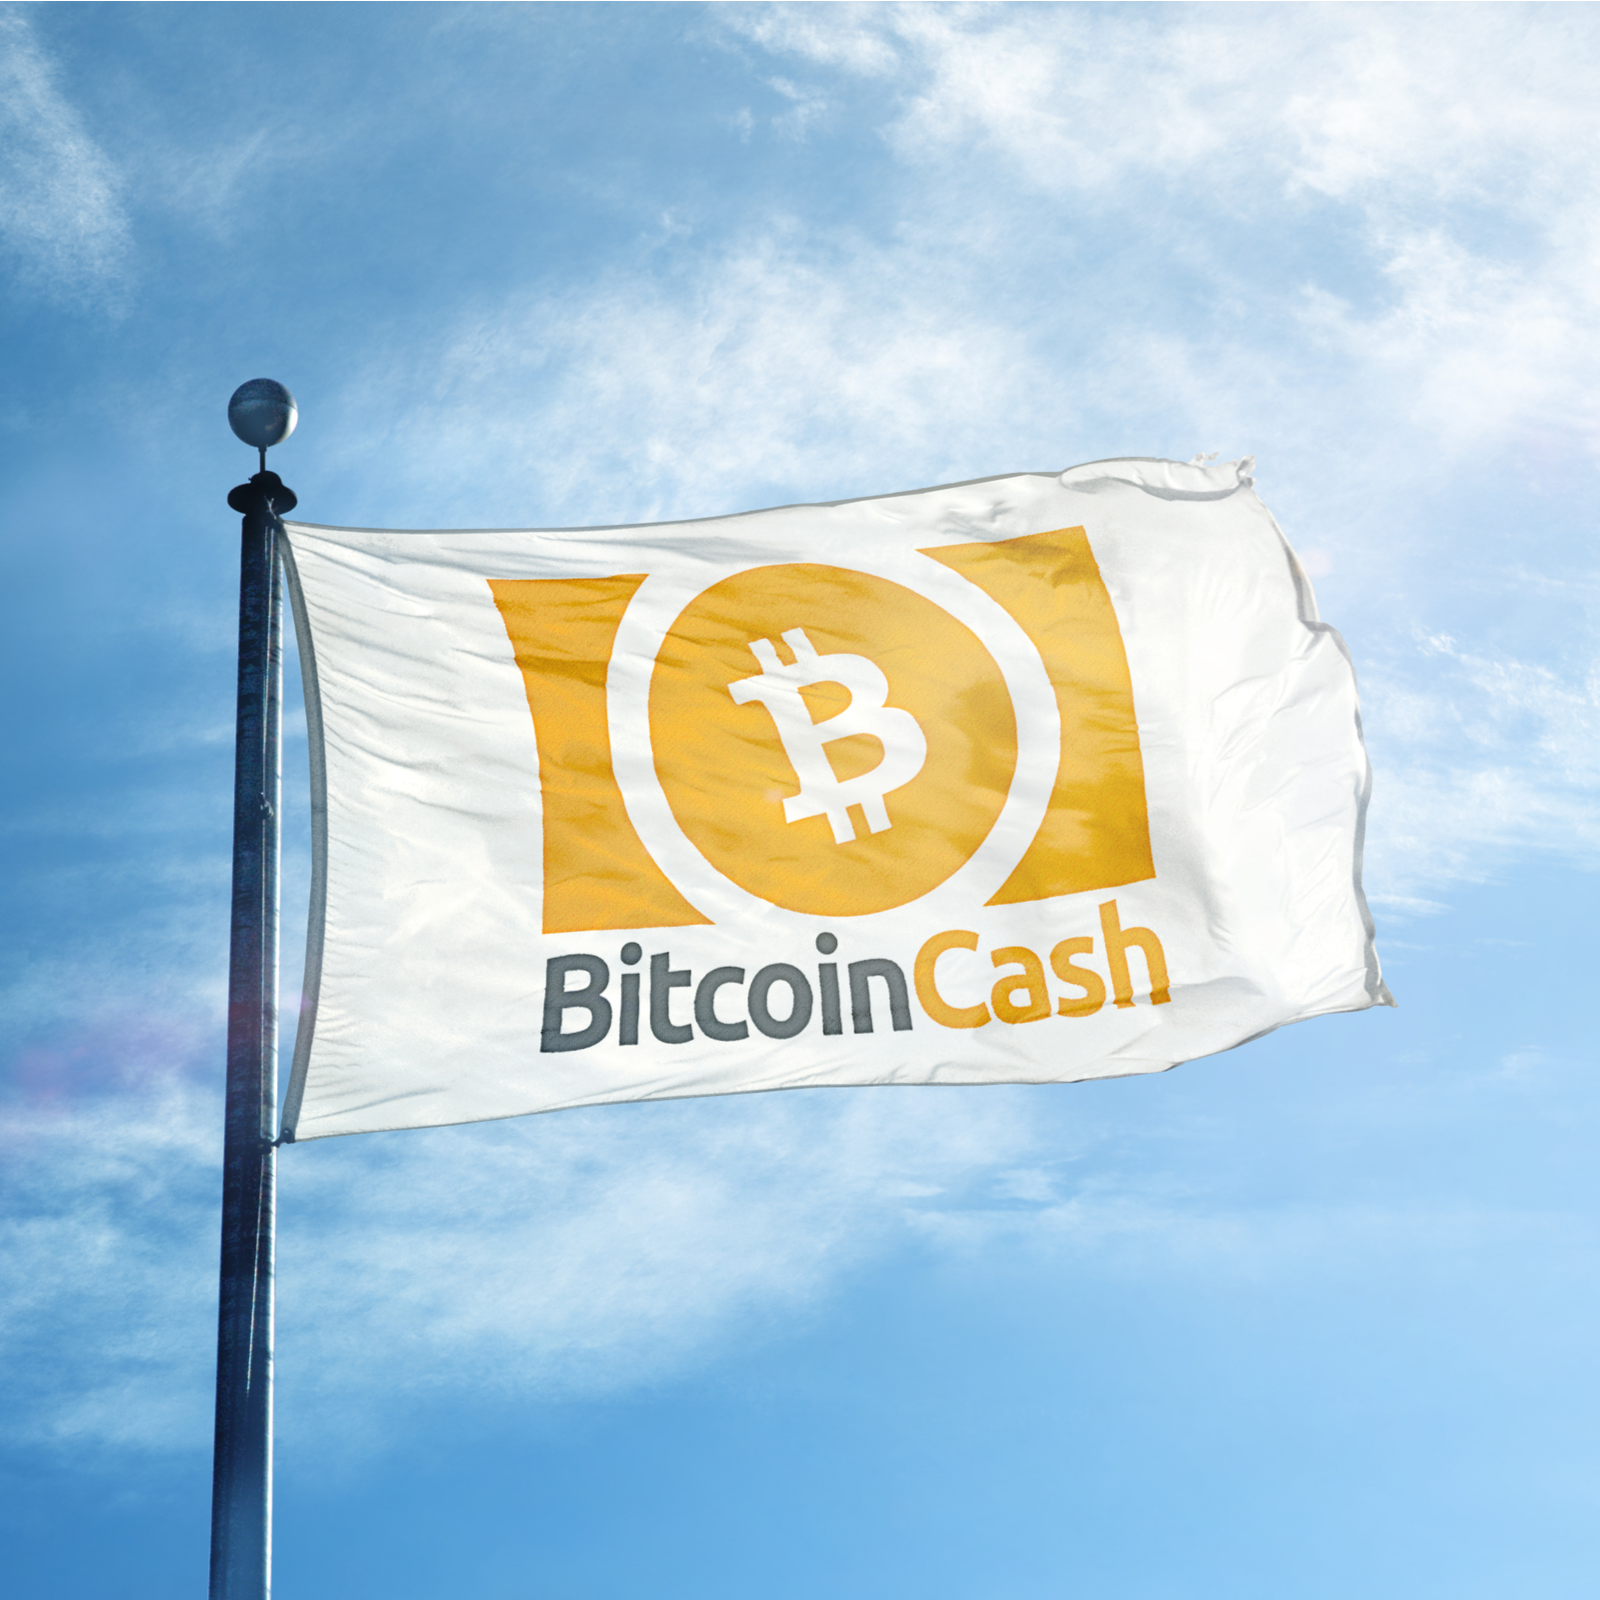 Viabtc Announces New Cryptocurrency Exchange With Bitcoin Cash as Base Currency